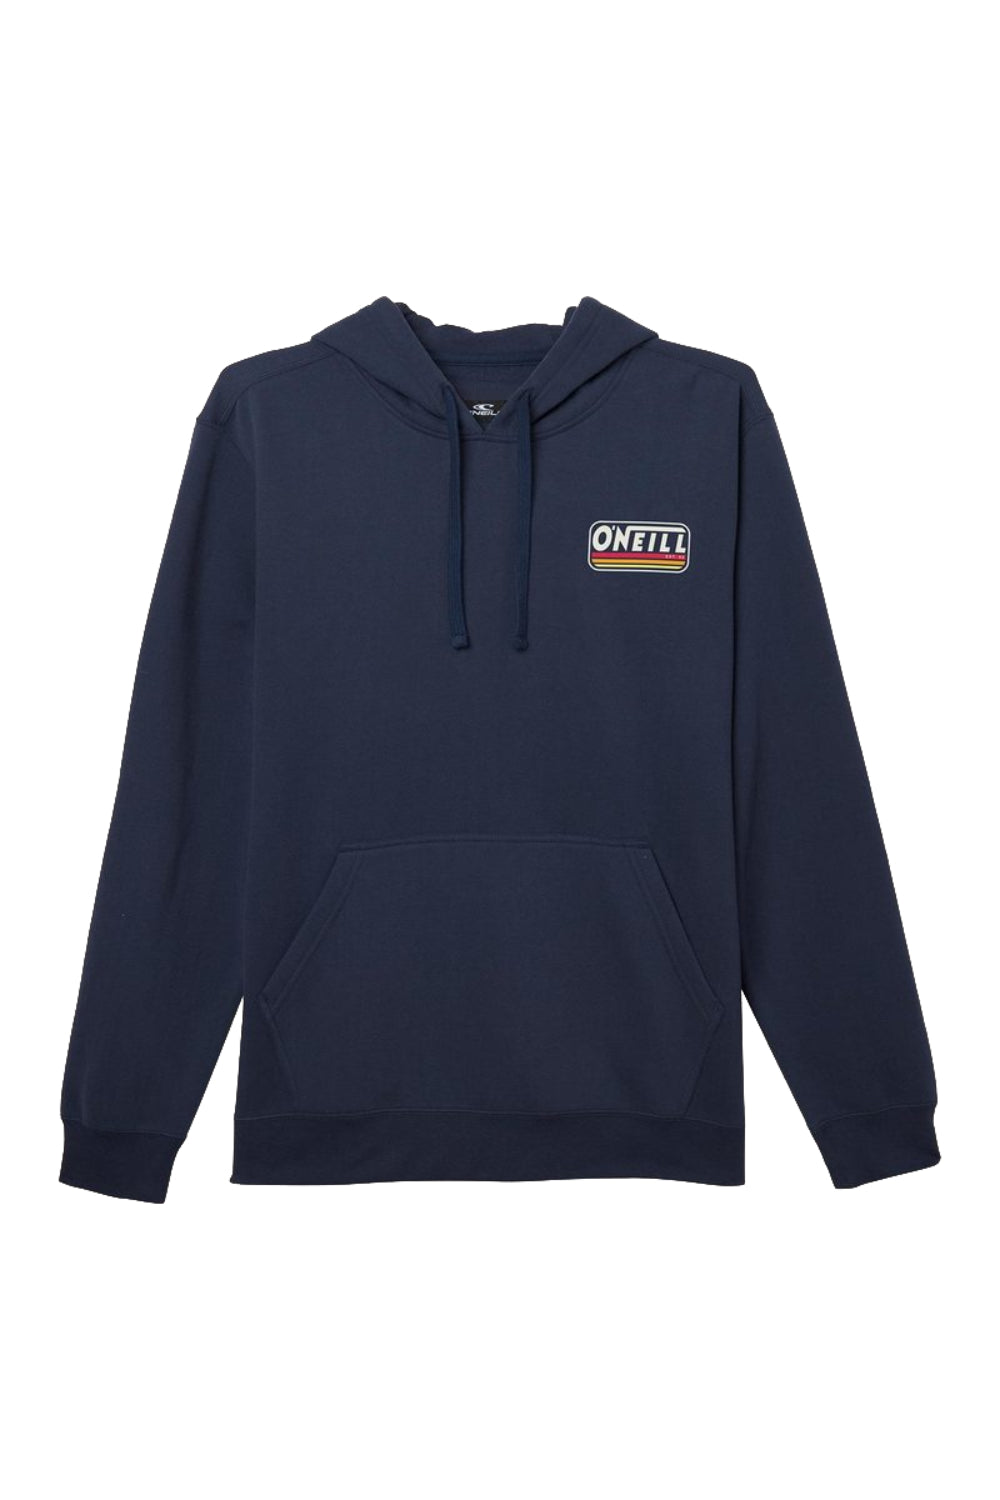 Oneill Fifty Two Pullover Fleece NVY2 M